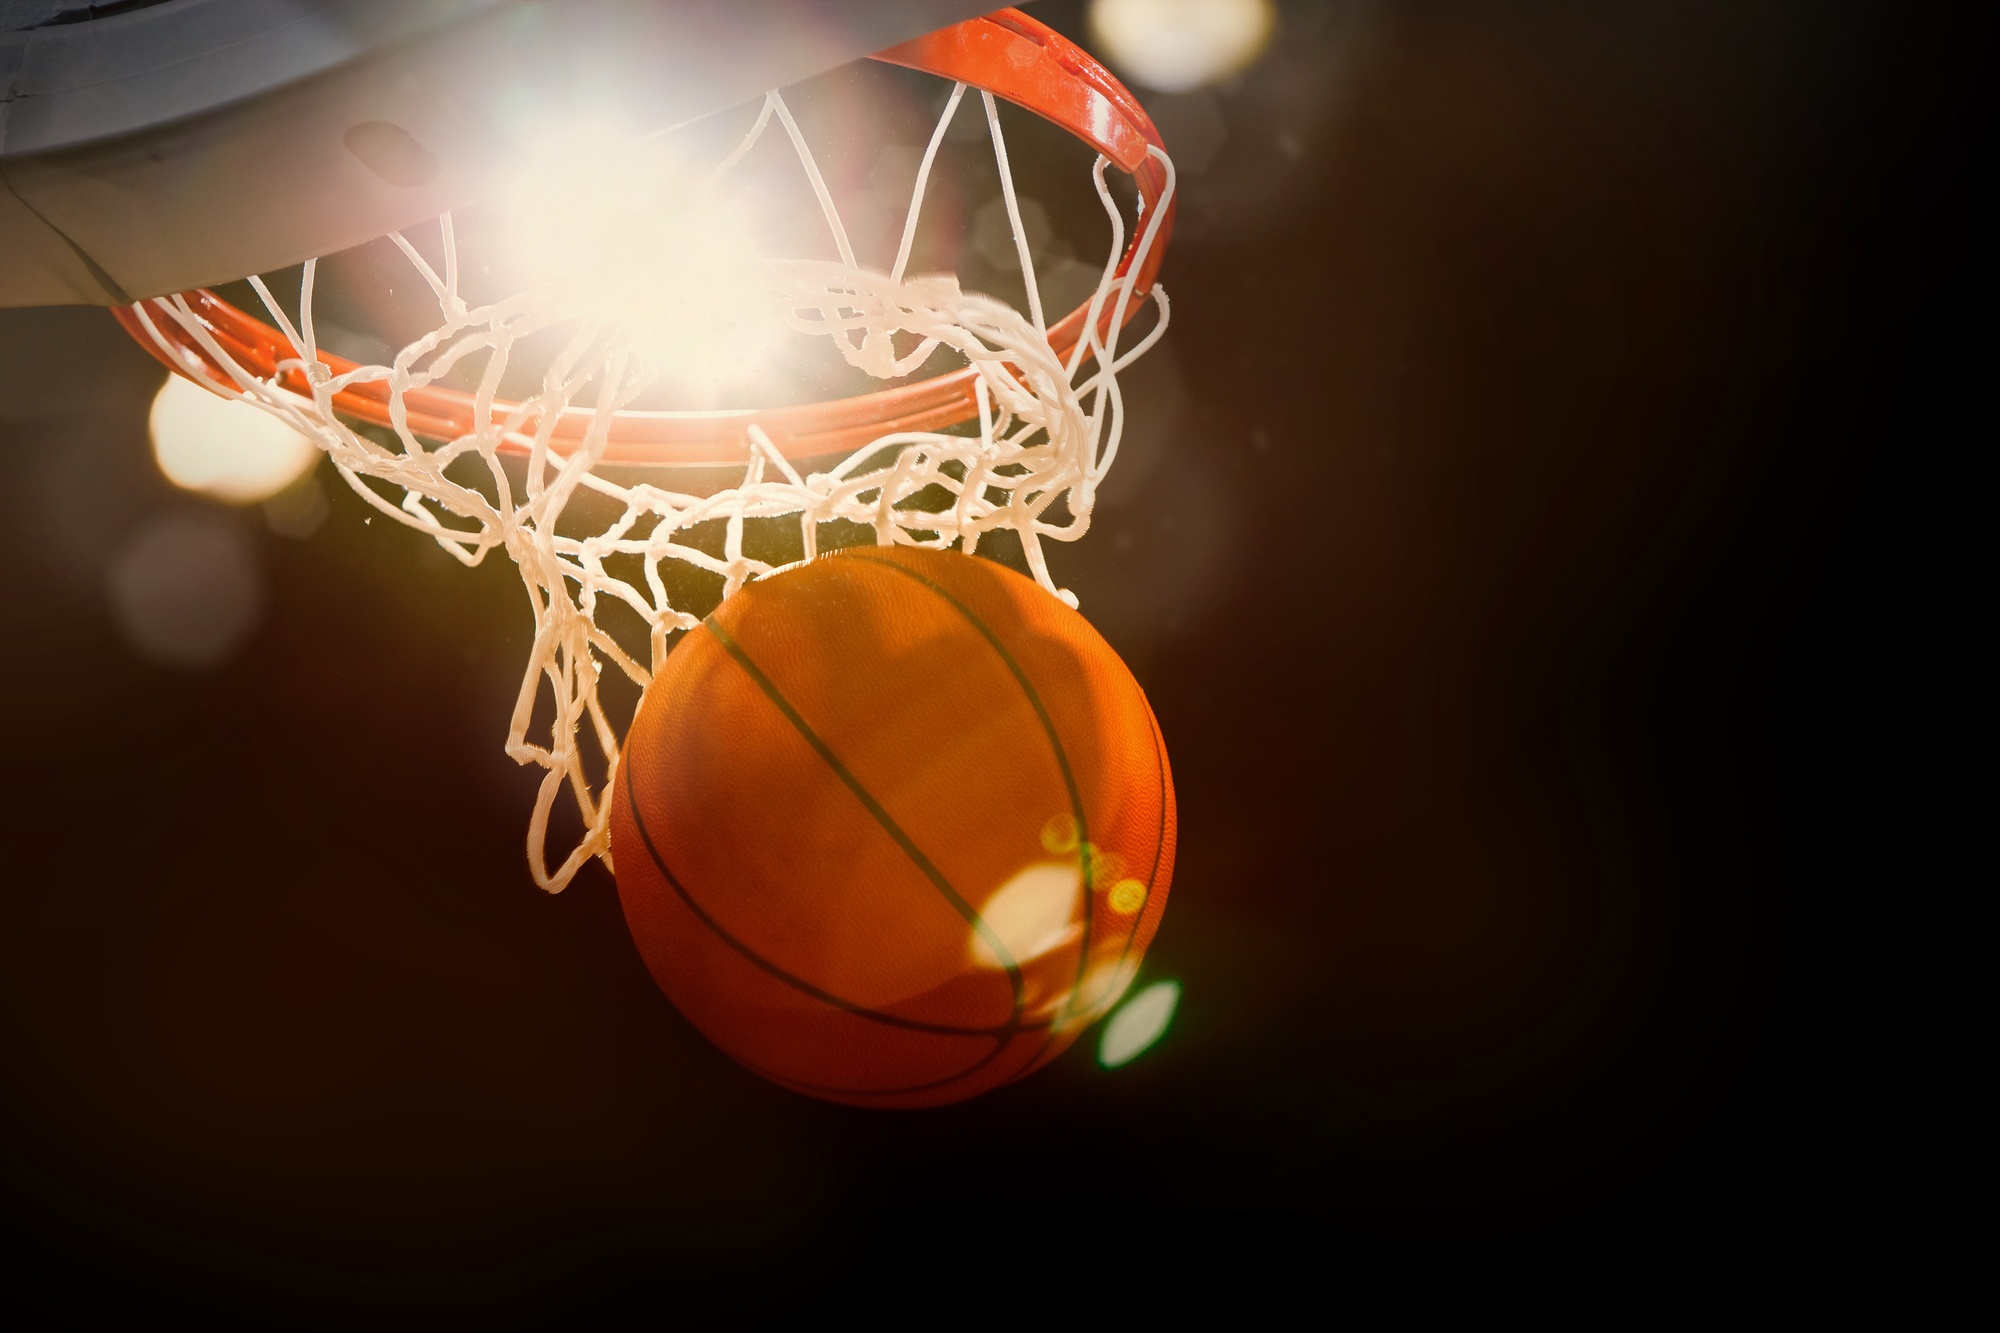 Effective Leadership – What Basketball Coaches & Sales Directors Have in Common